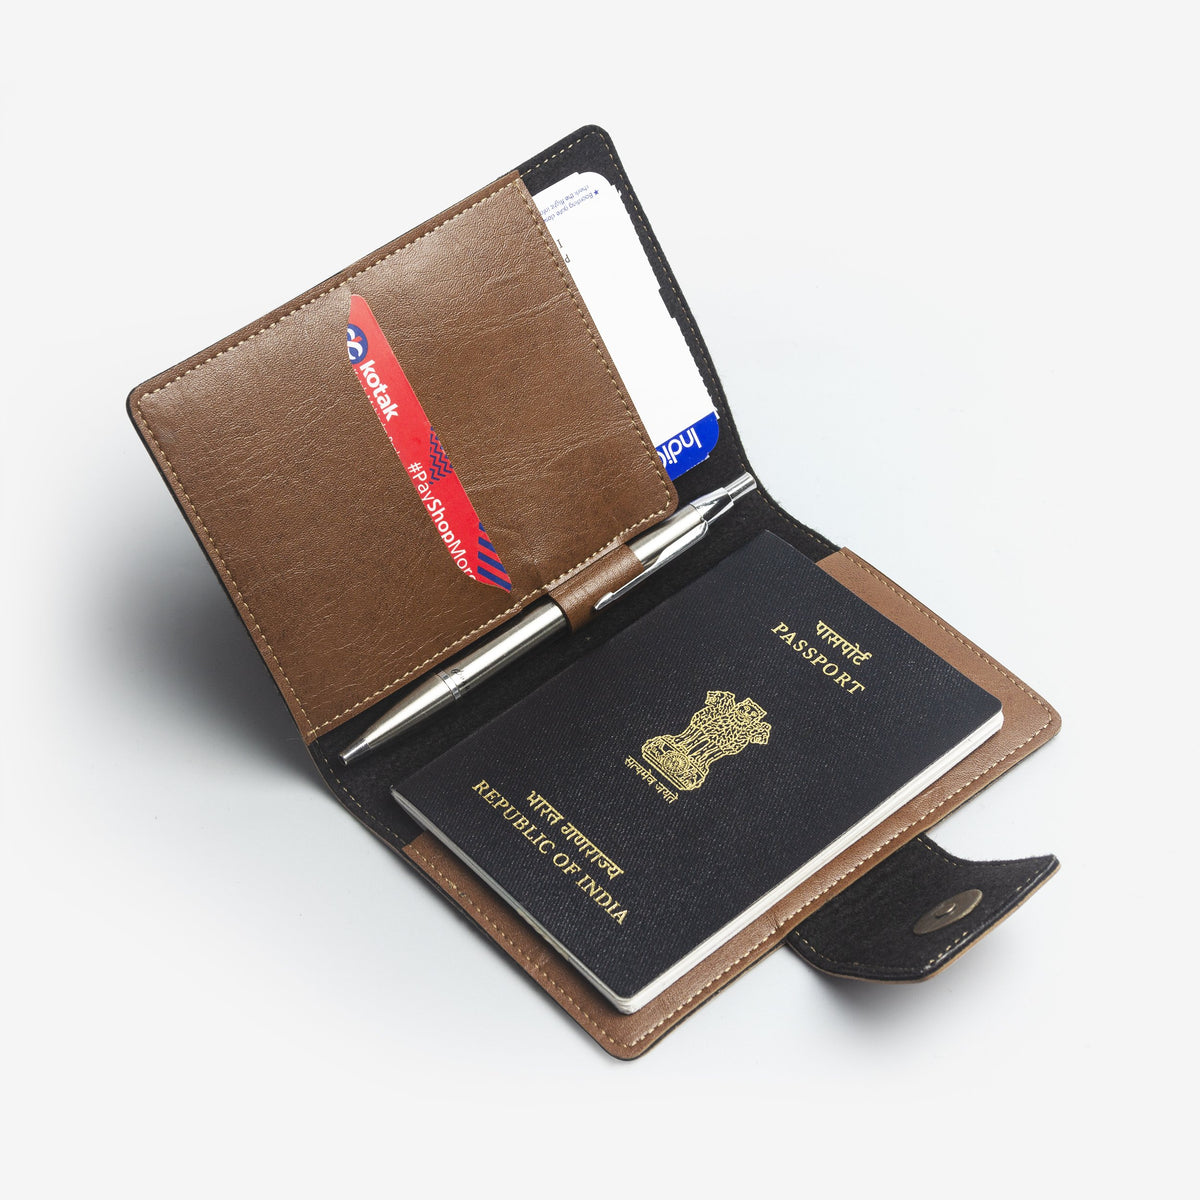 The Messy Corner Mini Travel Wallet Passport cover with button - Tan